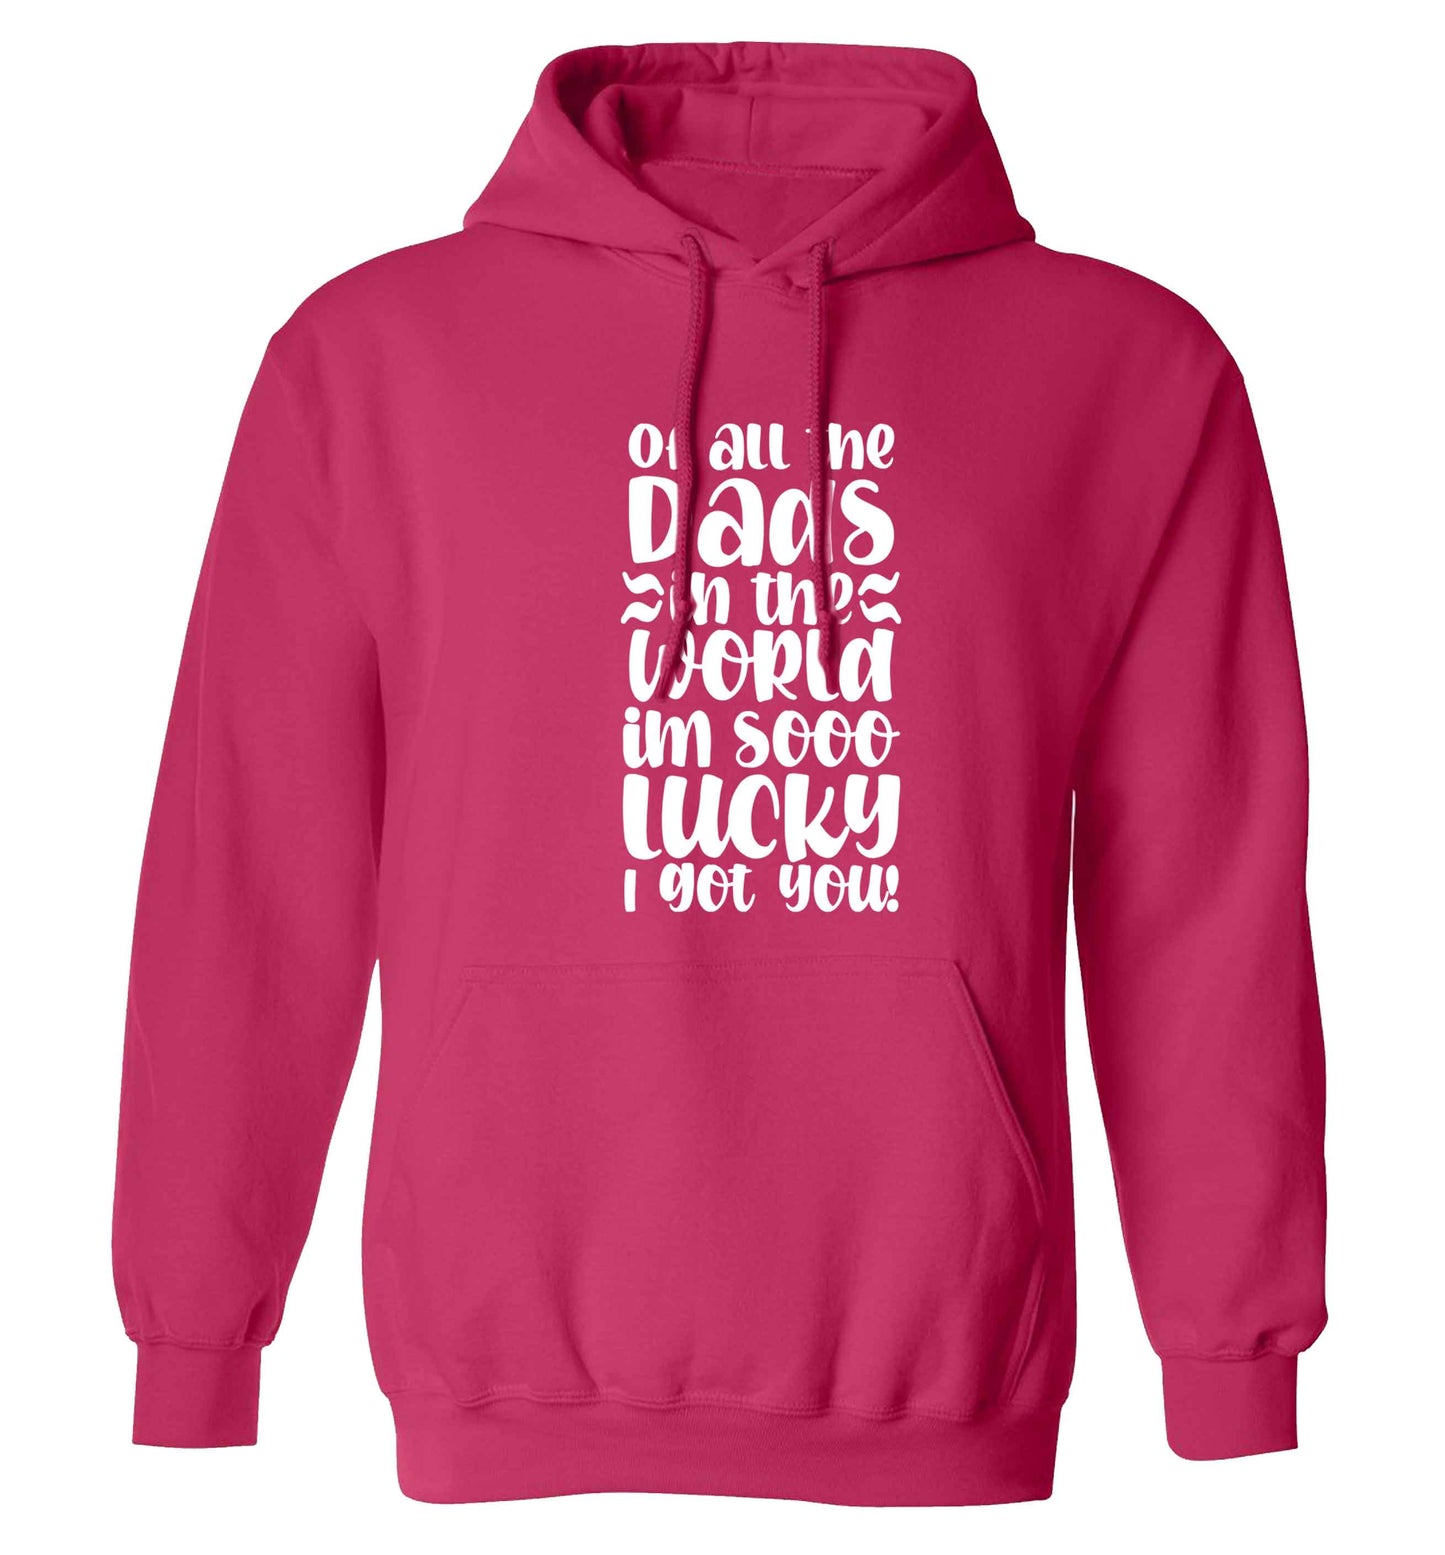 Of all the Dads in the world I'm so lucky I got you adults unisex pink hoodie 2XL